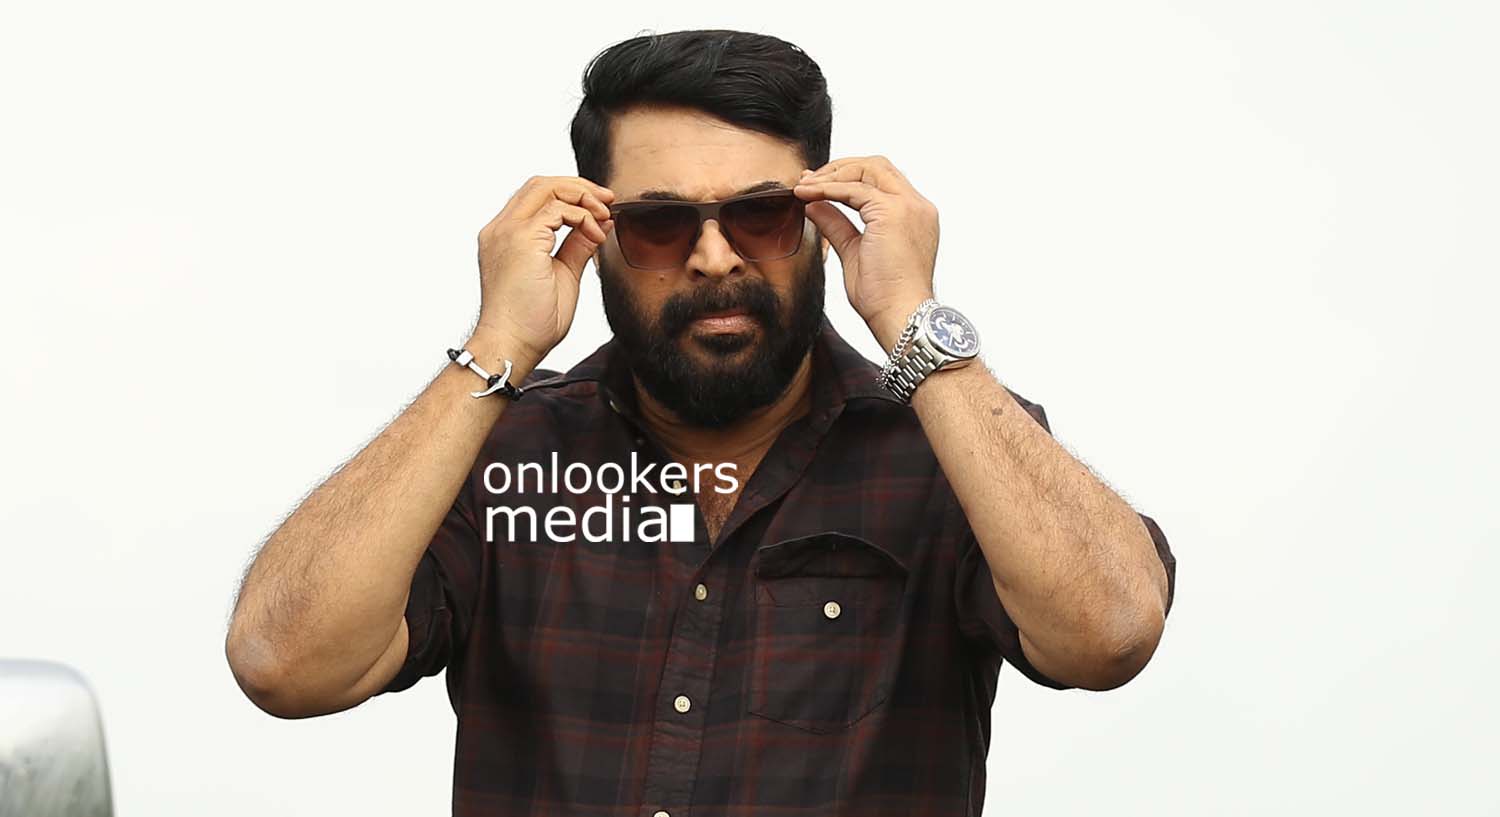 The Great Father stills, mammootty The Great Father photos, The Great Father high quality HD stills, latest malayalam movie, mammootty stylish look, david nainan,